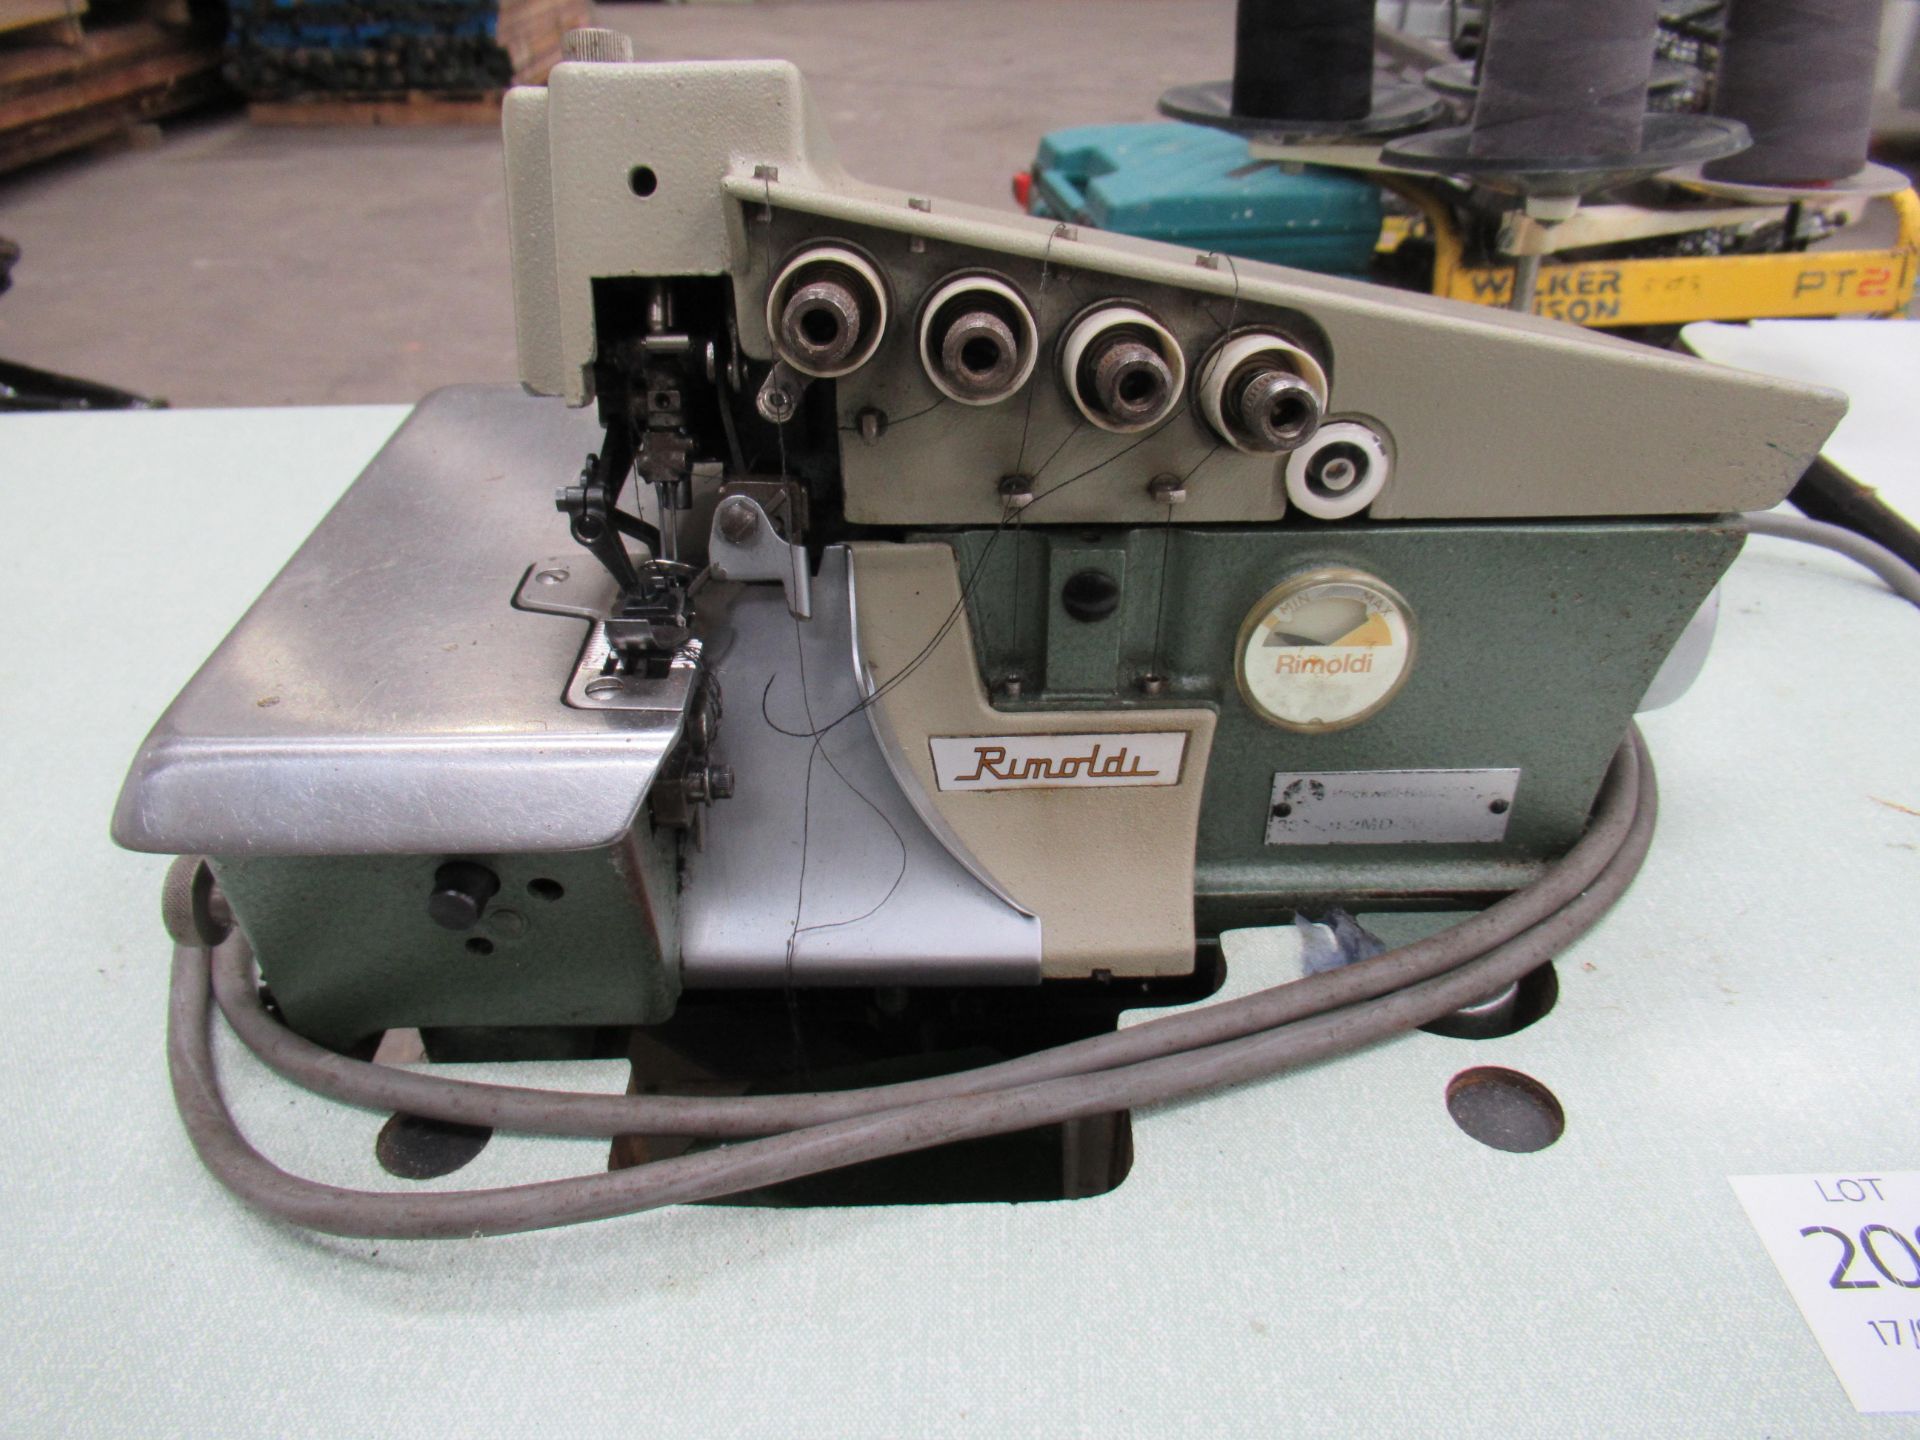 Rimoldi industrial sewing machine. Please note there is a lift out fee of £5 plus VAT on this lot - Image 3 of 6